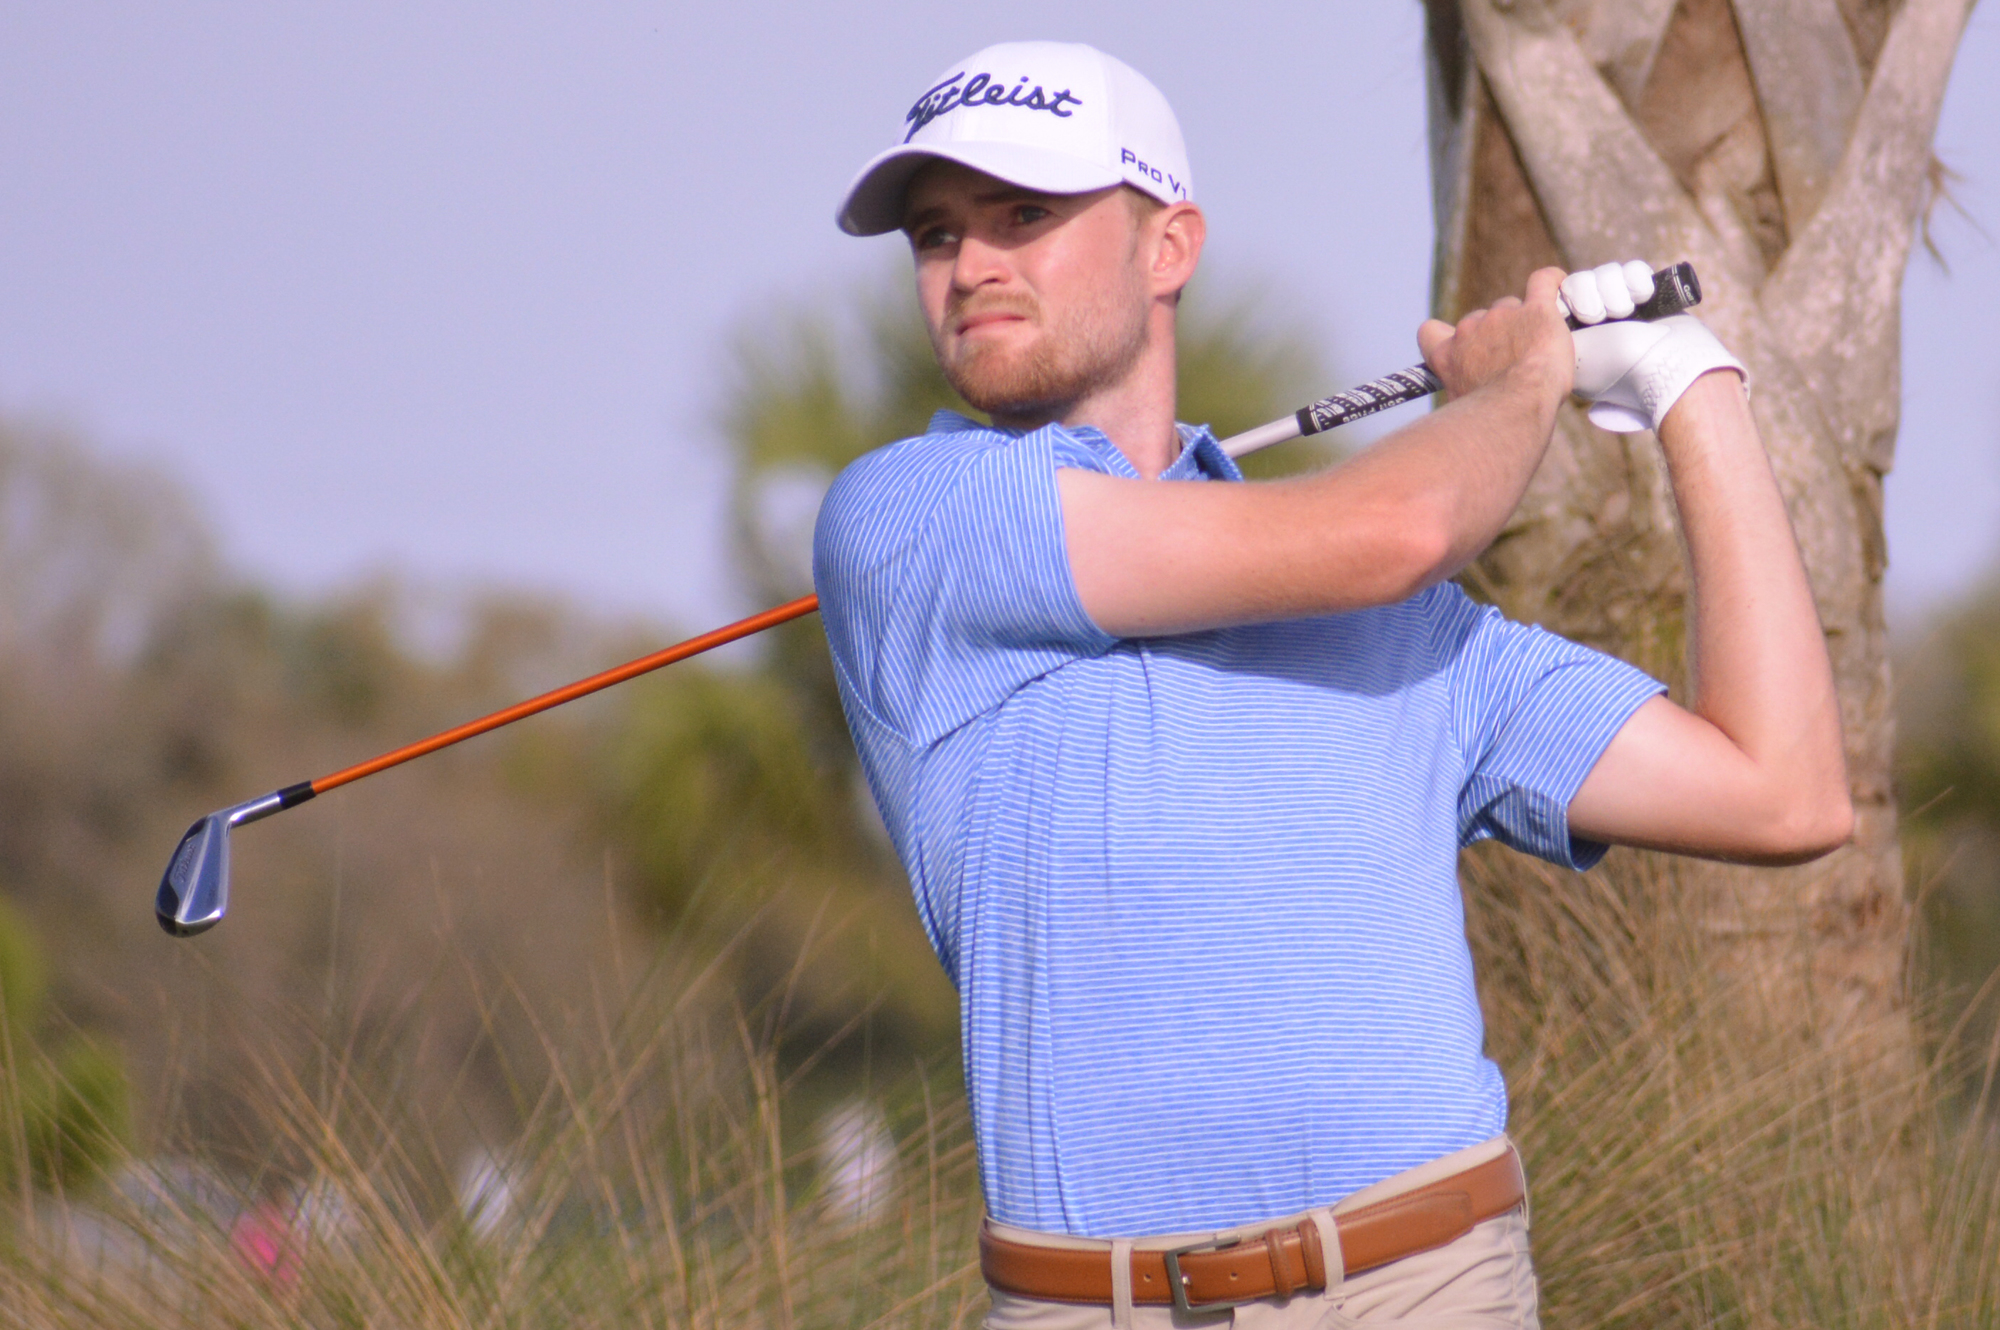 Danny Walker shot seven under par during the LECOM Suncoast Classic's second round, but missed the cut.